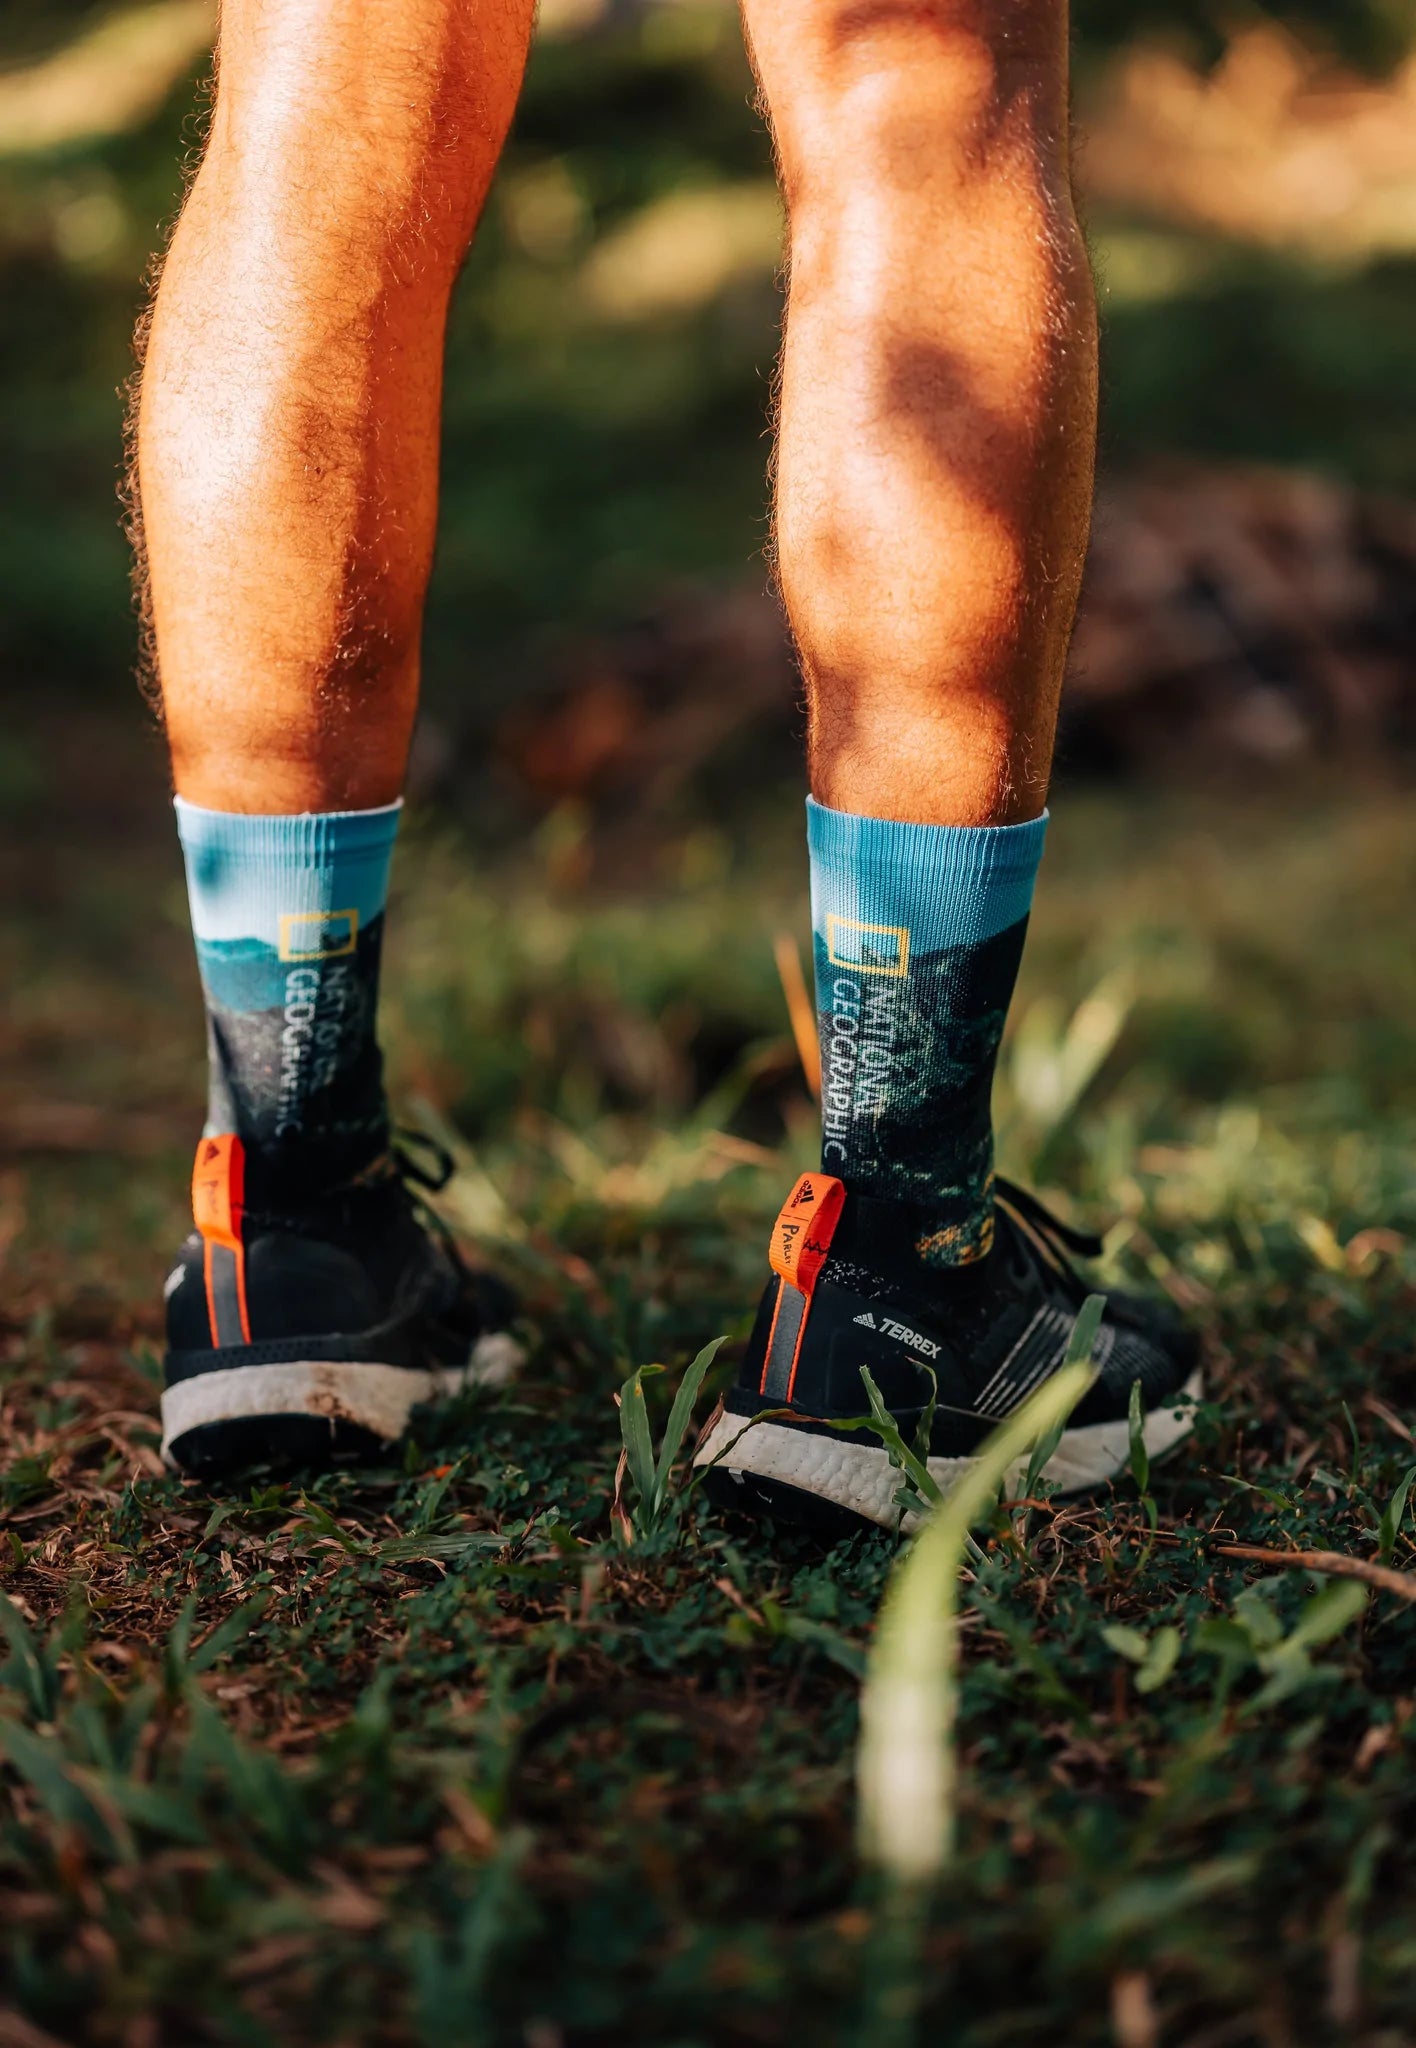 Chaussettes Running / Trail Homme Stance Poppy Trails